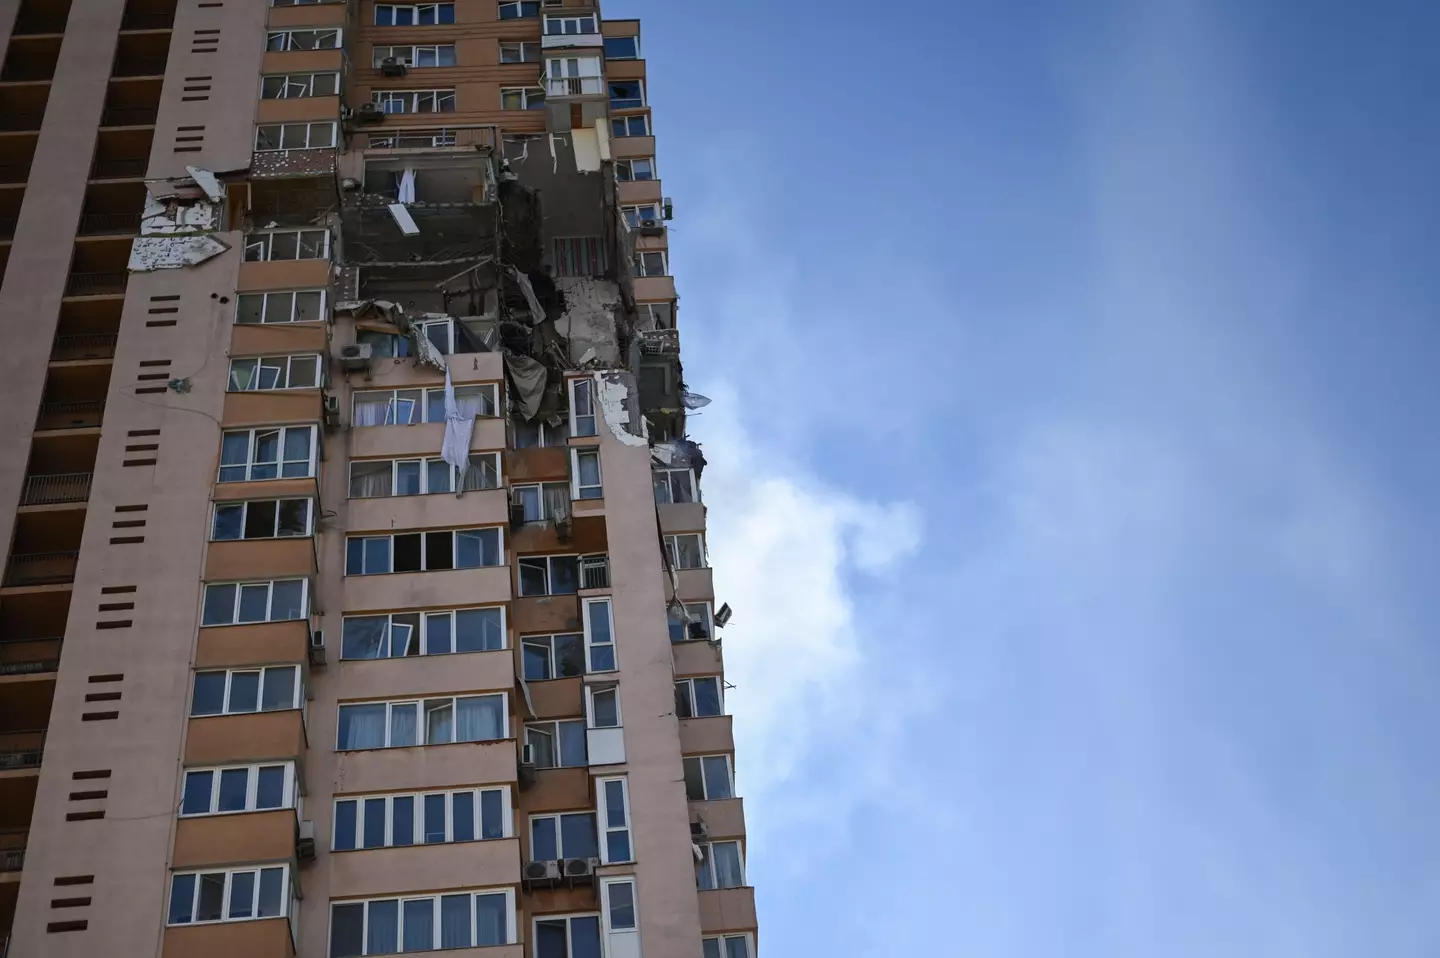 Kyiv apartment block hit by missile (Alamy)